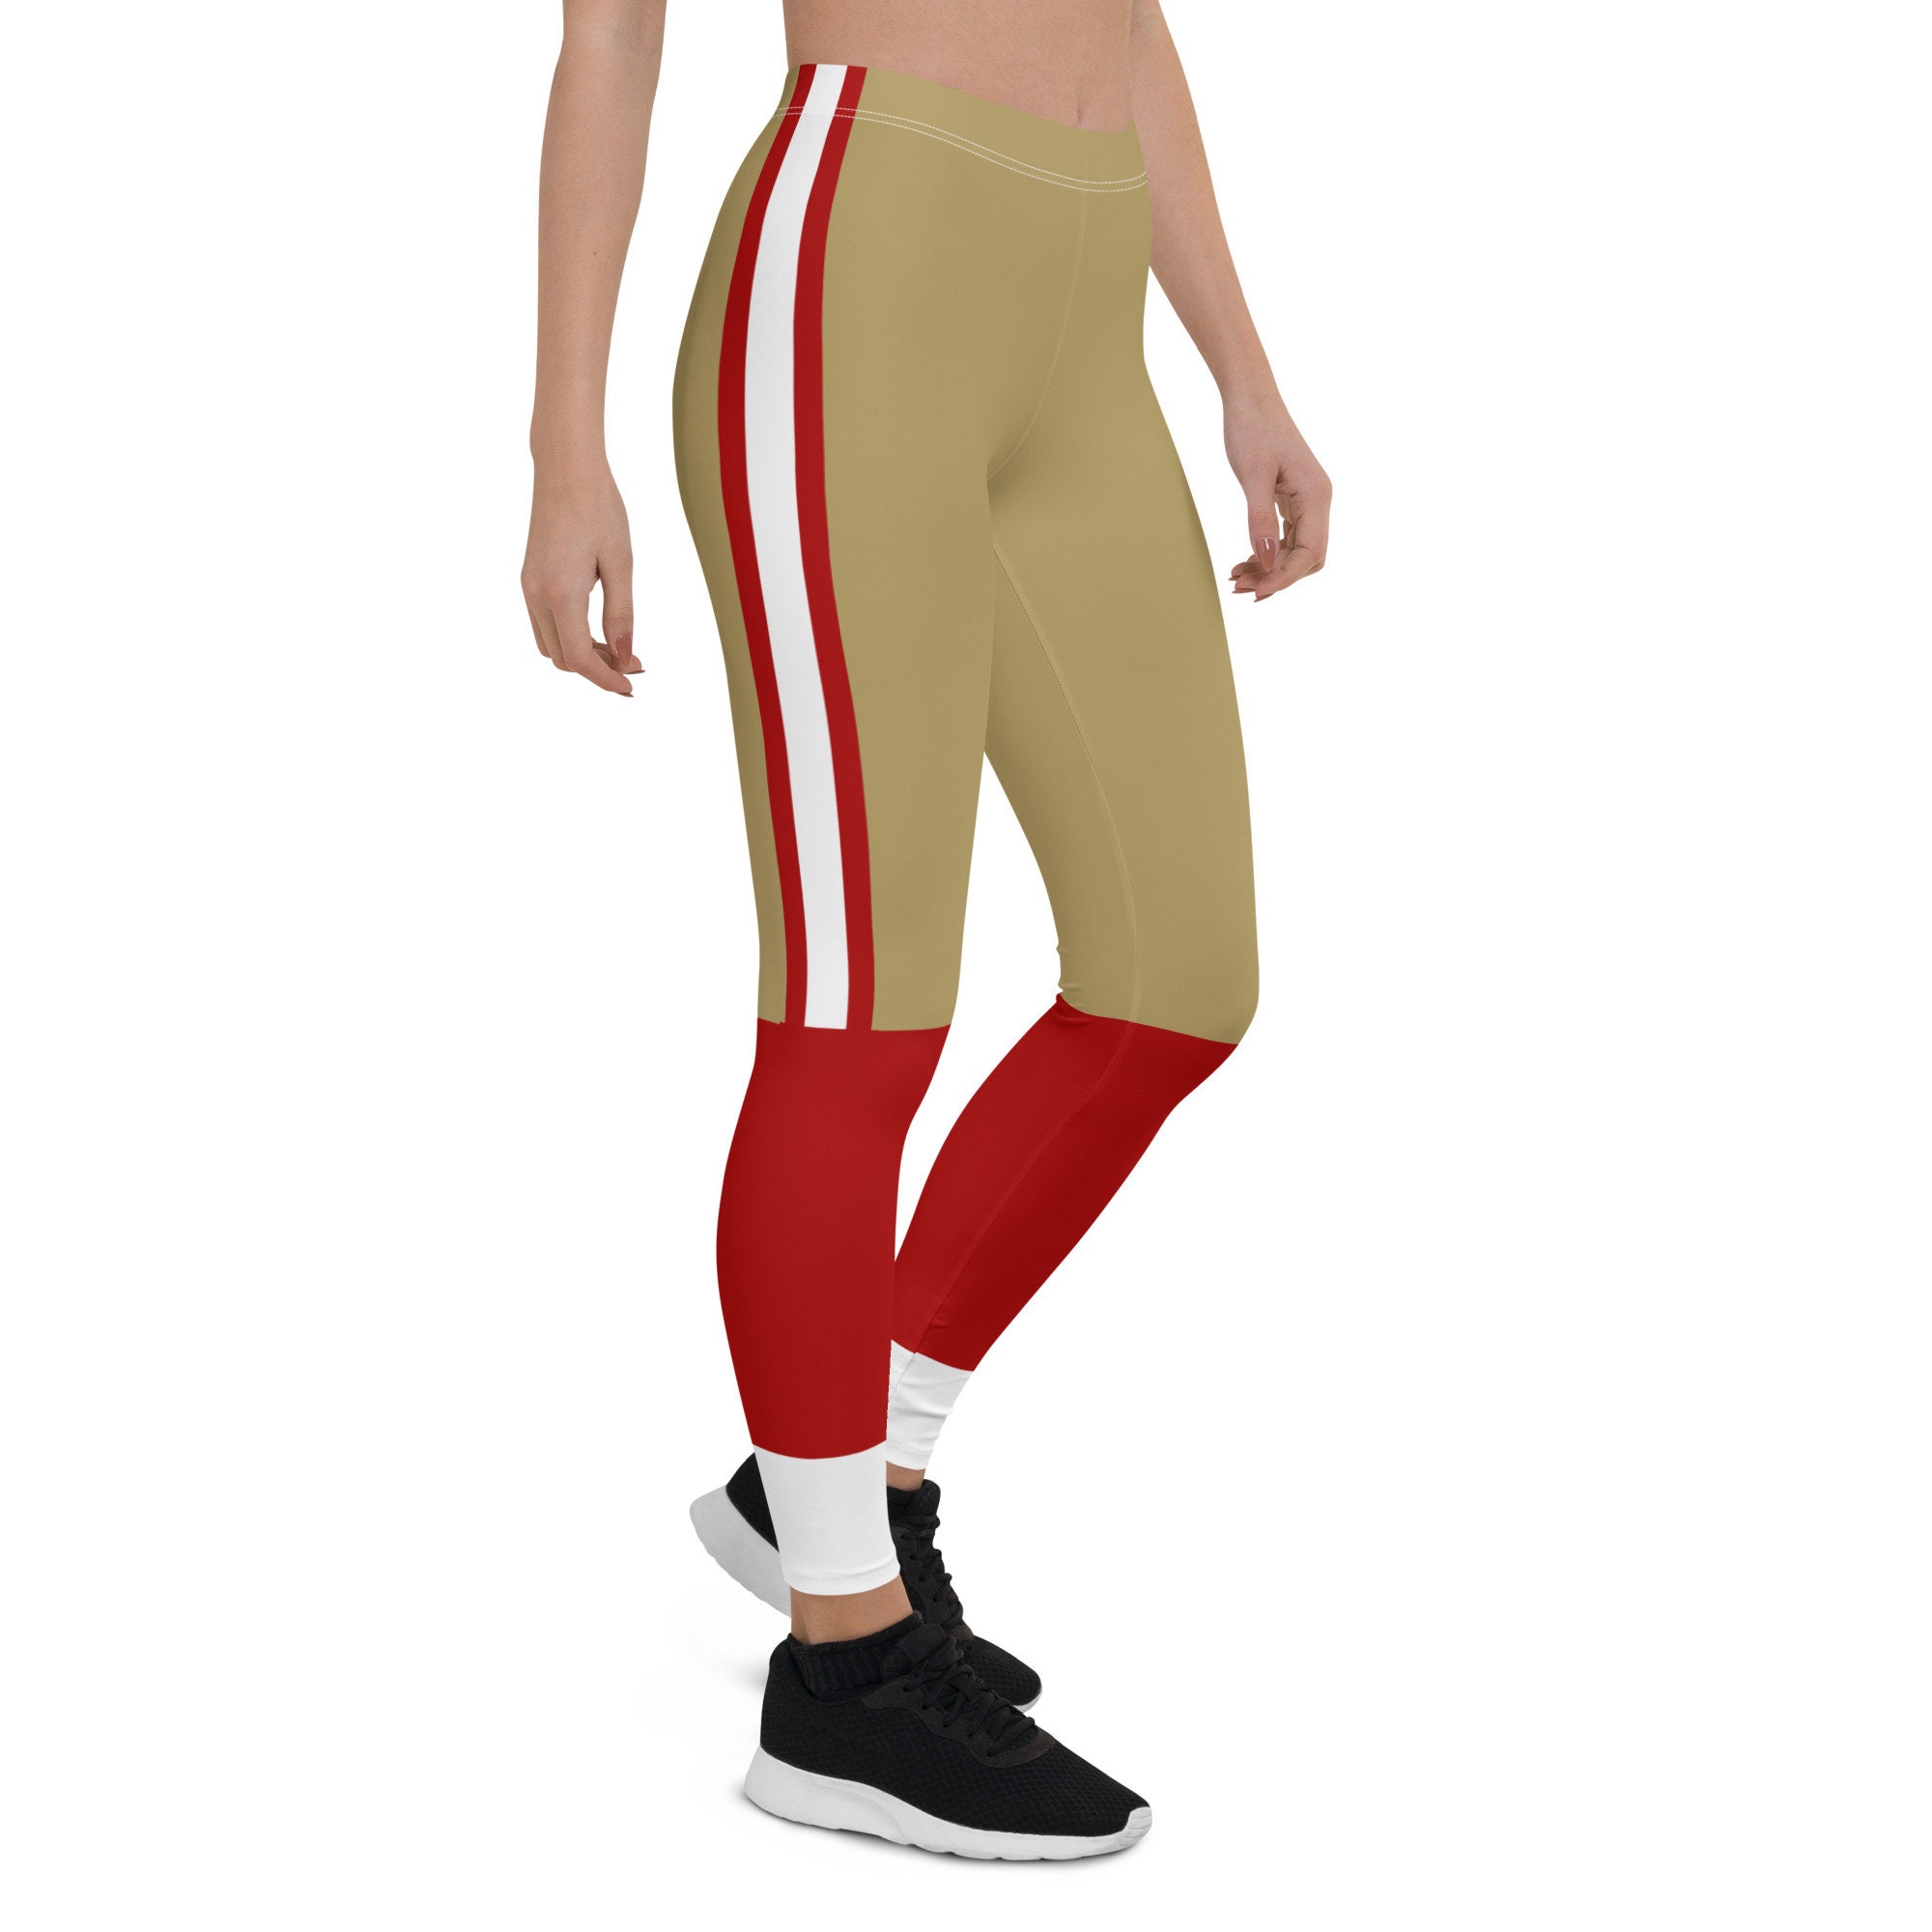 49ers Leggings/ San Francisco Fan/team Colors With Gold-red-white Striped/ ladies Football Style Sports Leggings 